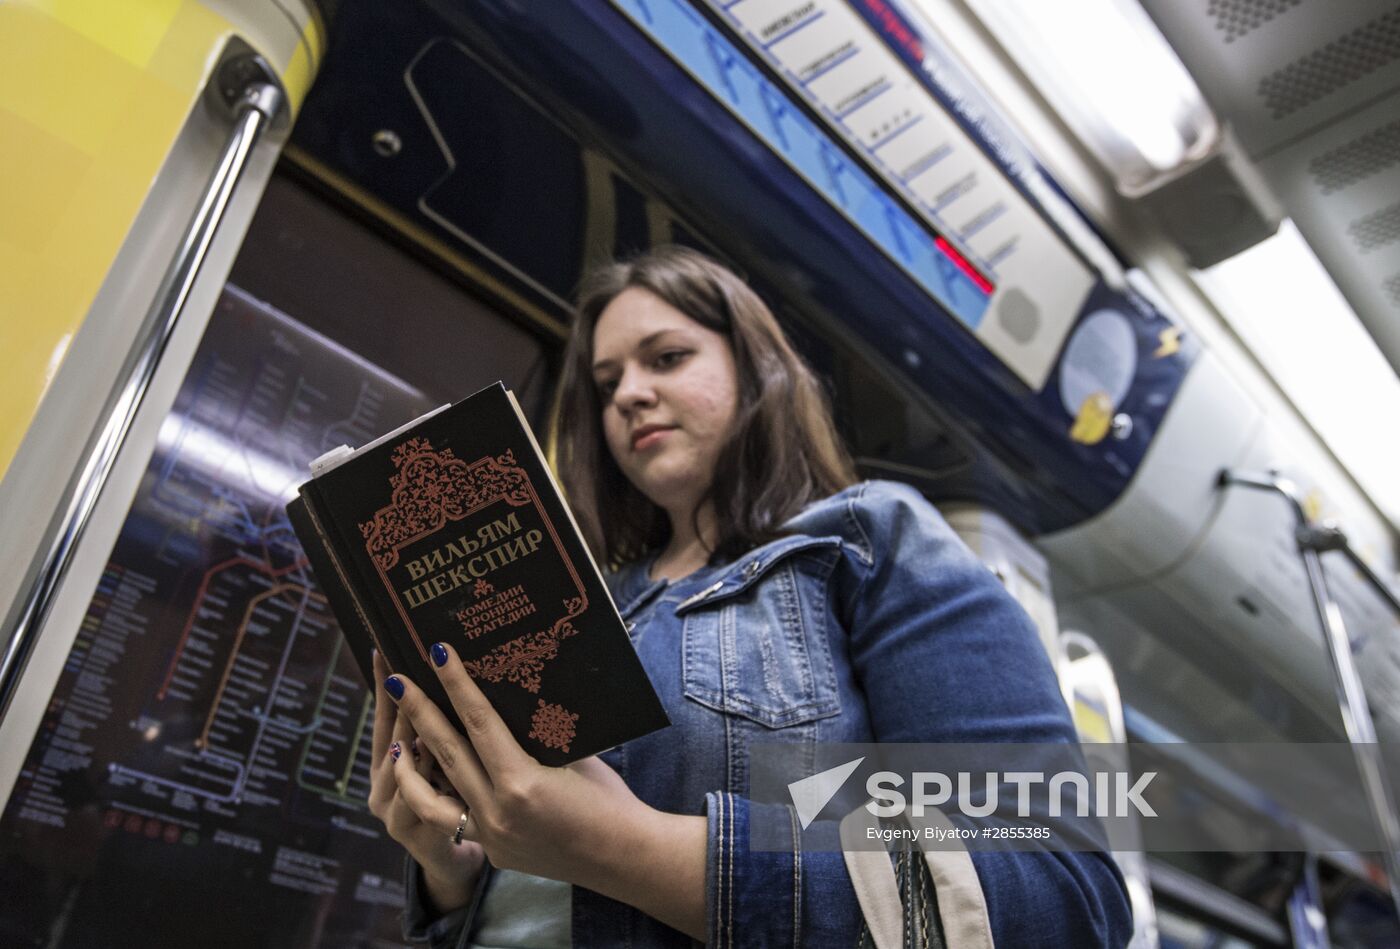 Head of British Council in Russia Michael Bird atLaunching Metro Poetry Train with new, Sheakespeare's Passions" exposition